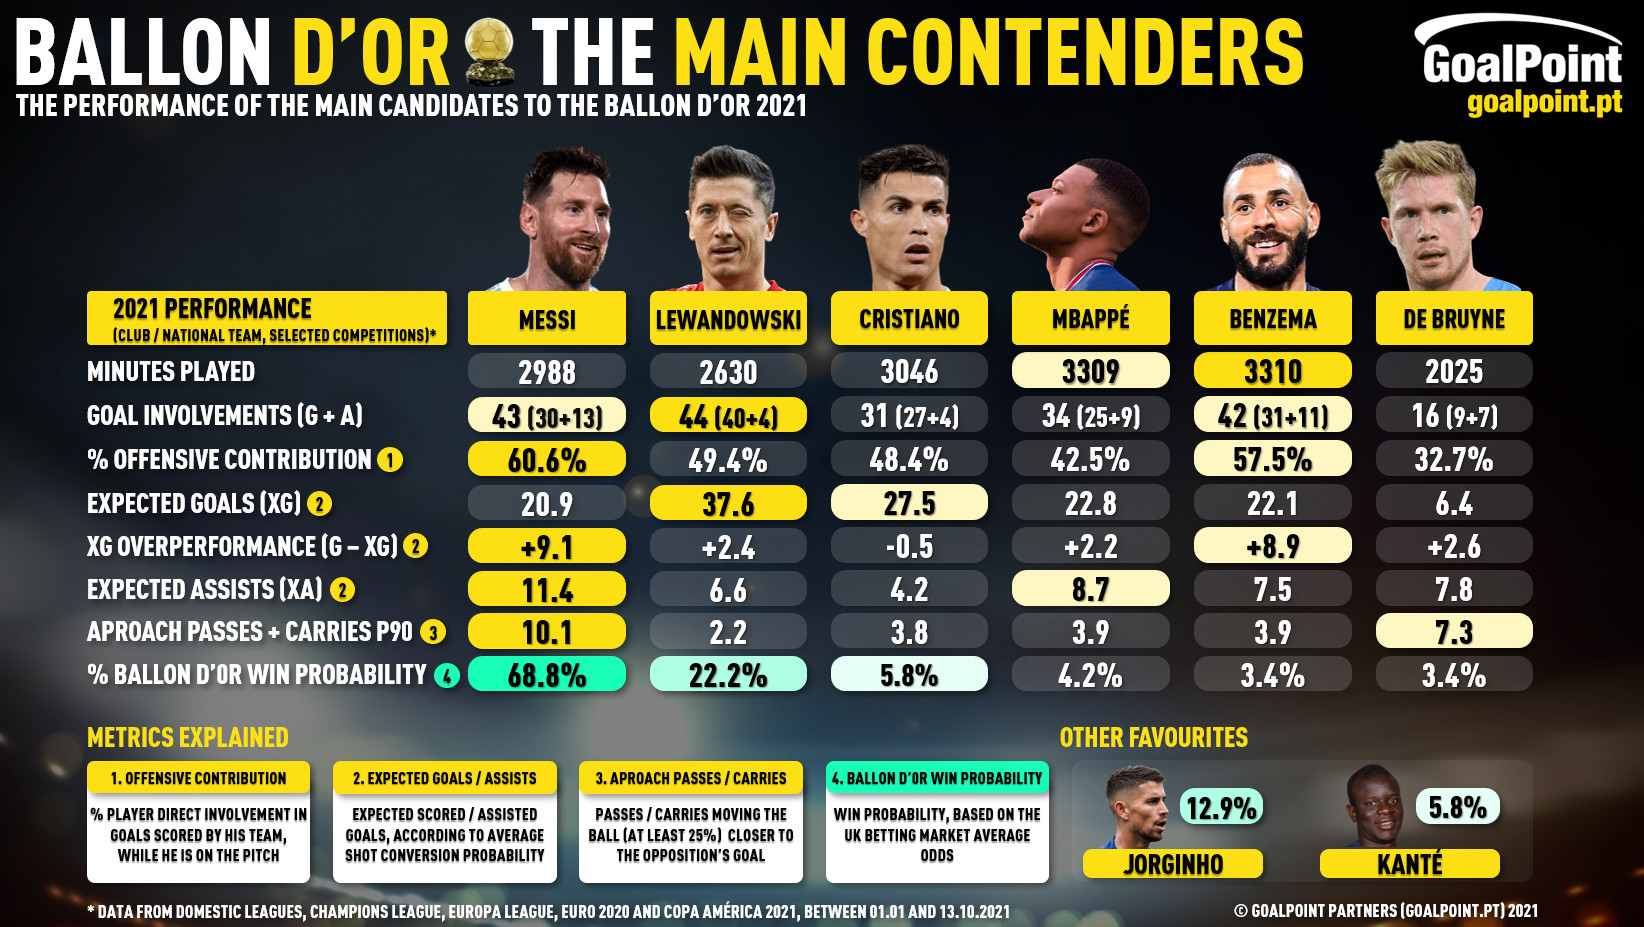 Was checking out the odds for the Ballon d'or at Goal.com. Have